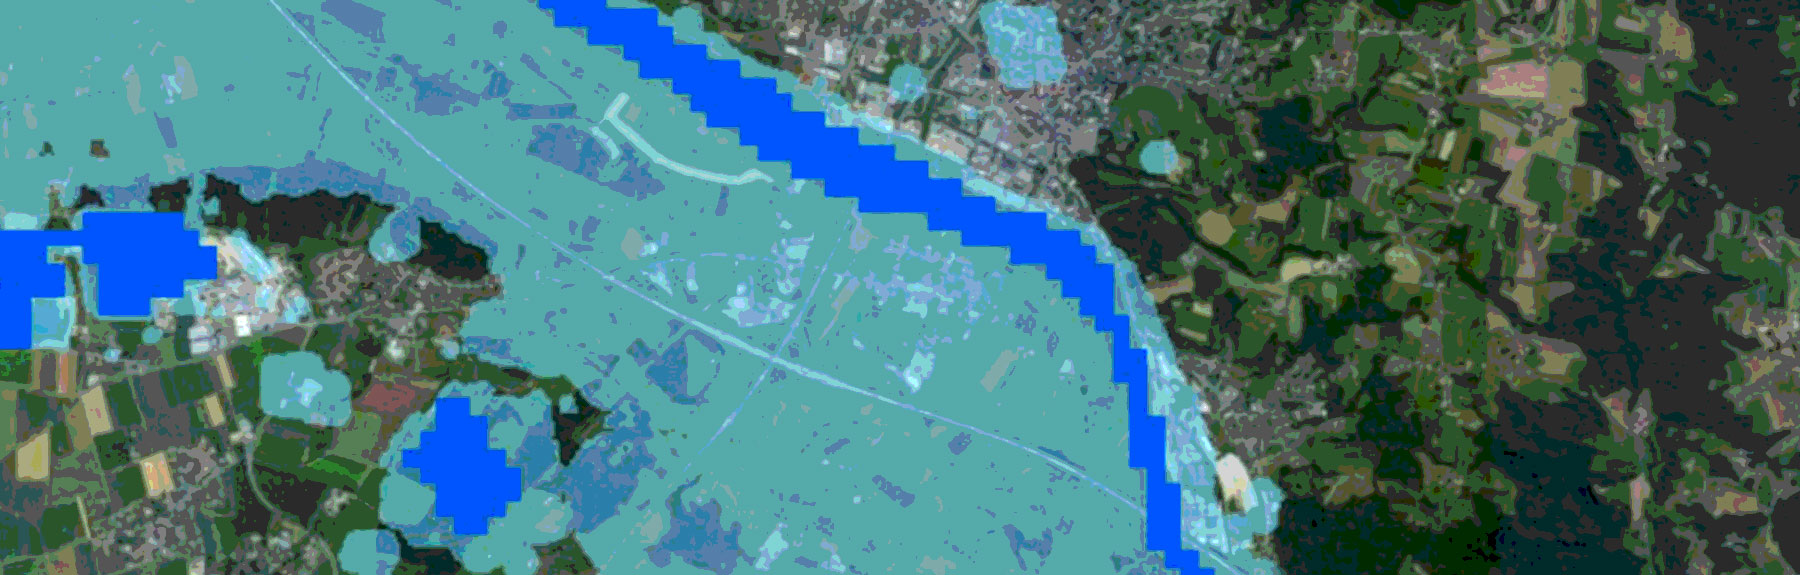 Mapping the 2013 Floods in Central Europe